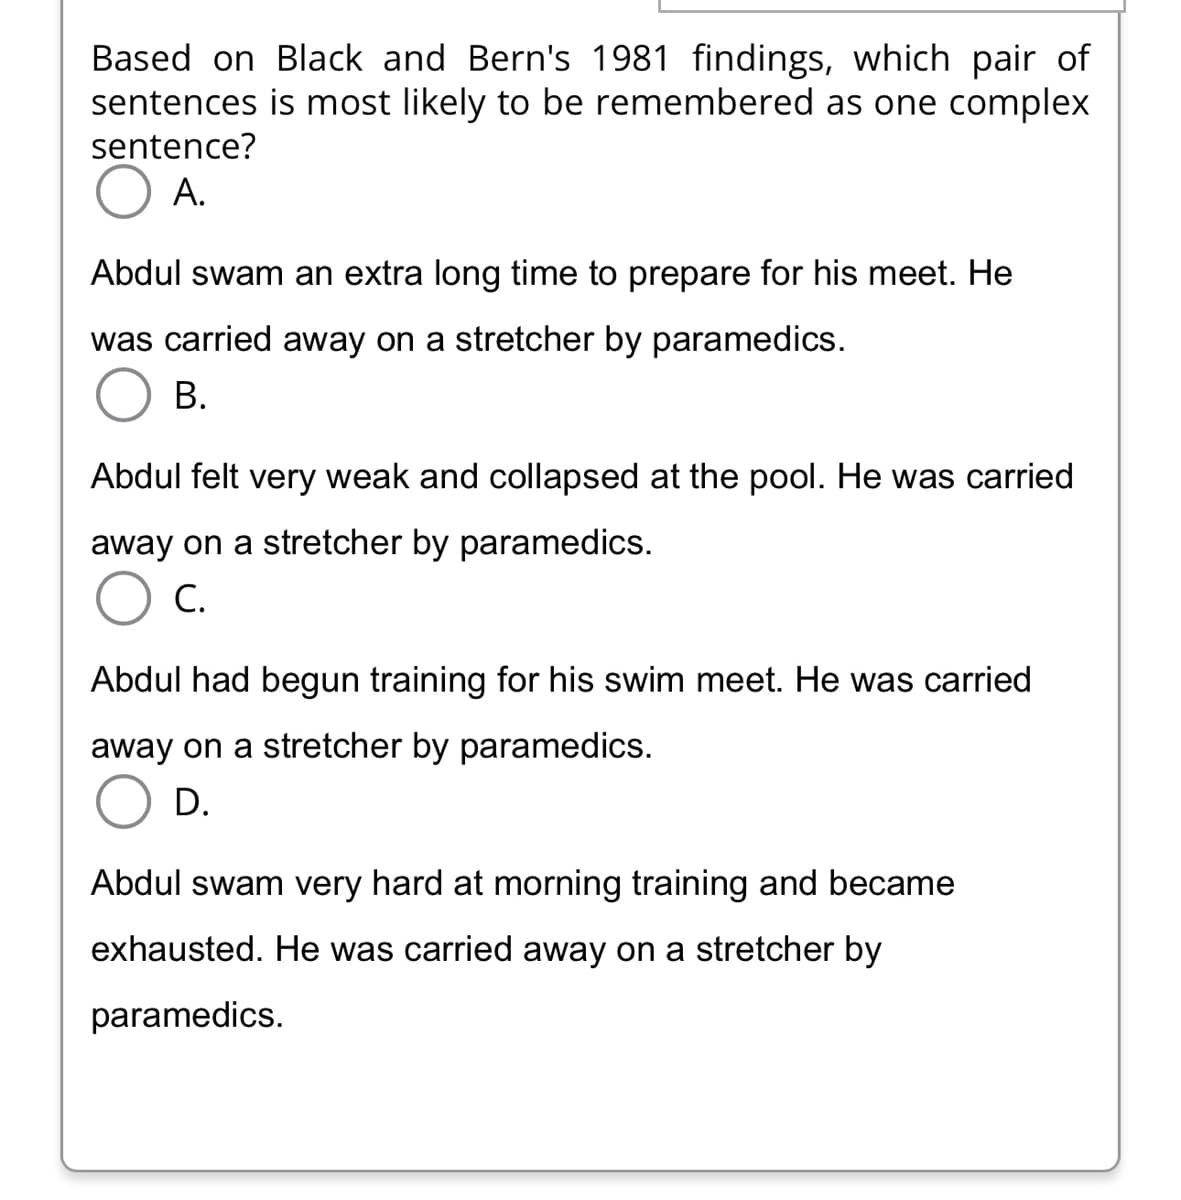 Based on Black and Bern's 1981 findings, which pair of
is most likely to be remembered as one complex
sentences
sentence?
O A.
Abdul swam an extra long time to prepare for his meet. He
was carried away on a stretcher by paramedics.
B.
Abdul felt very weak and collapsed at the pool. He was carried
away on a stretcher by paramedics.
C.
Abdul had begun training for his swim meet. He was carried
away on a stretcher by paramedics.
O D.
Abdul swam very hard at morning training and became
exhausted. He was carried away on a stretcher by
paramedics.